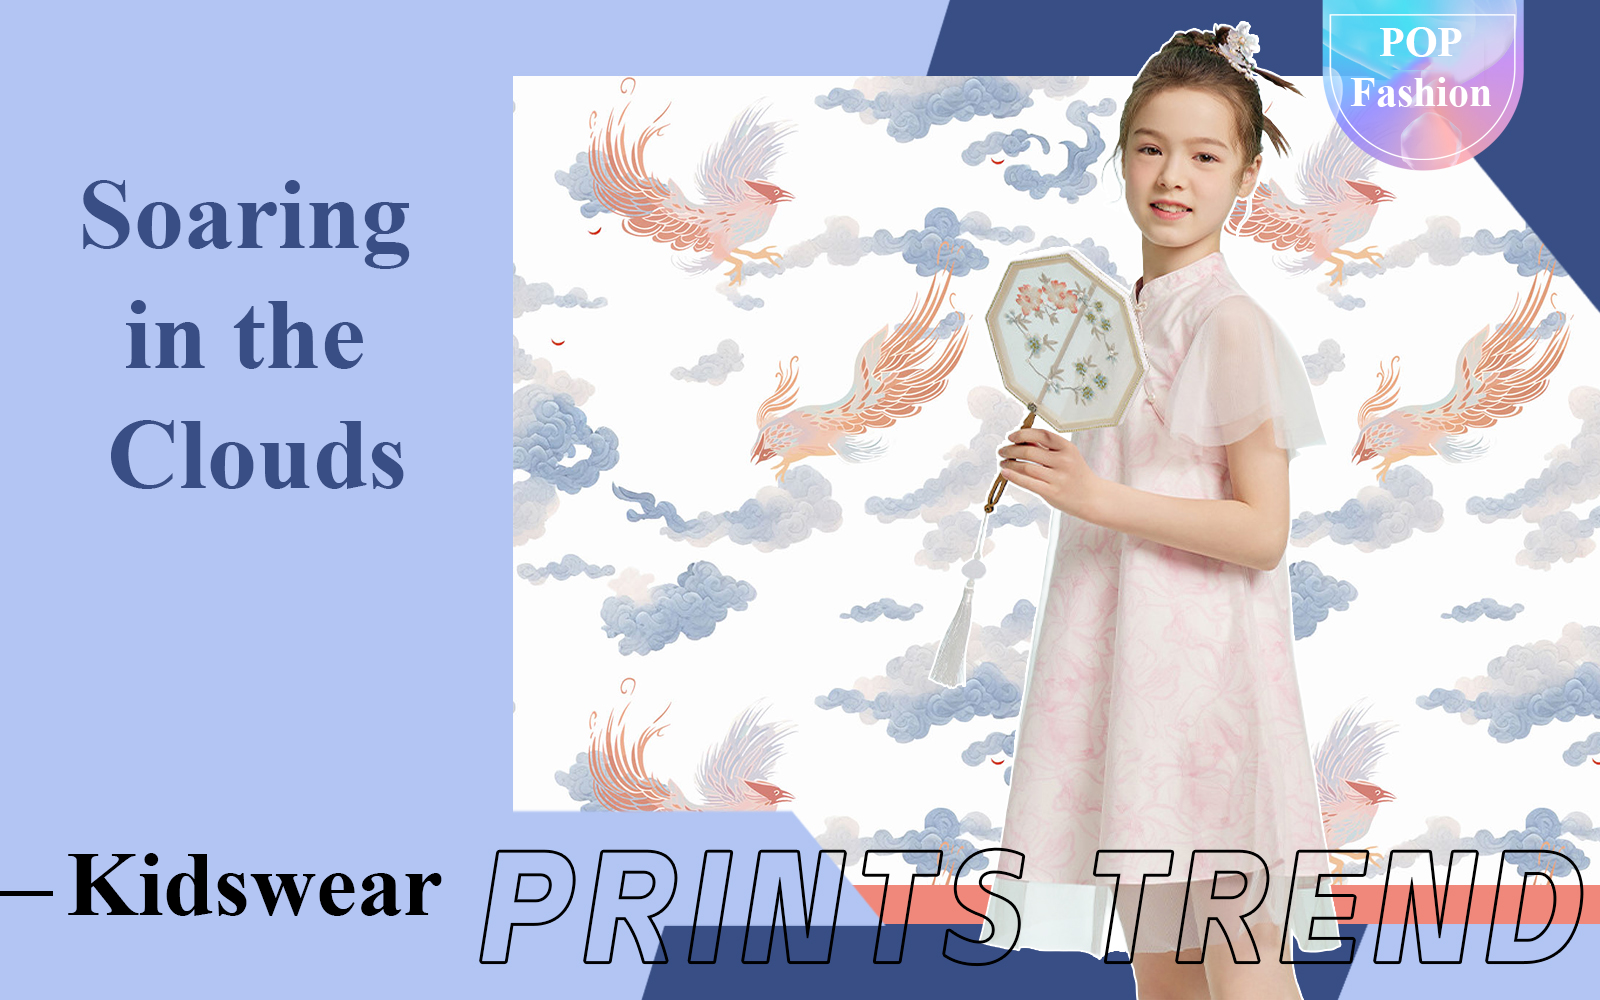 Soaring in the Clouds -- The Pattern Trend for Kidswear